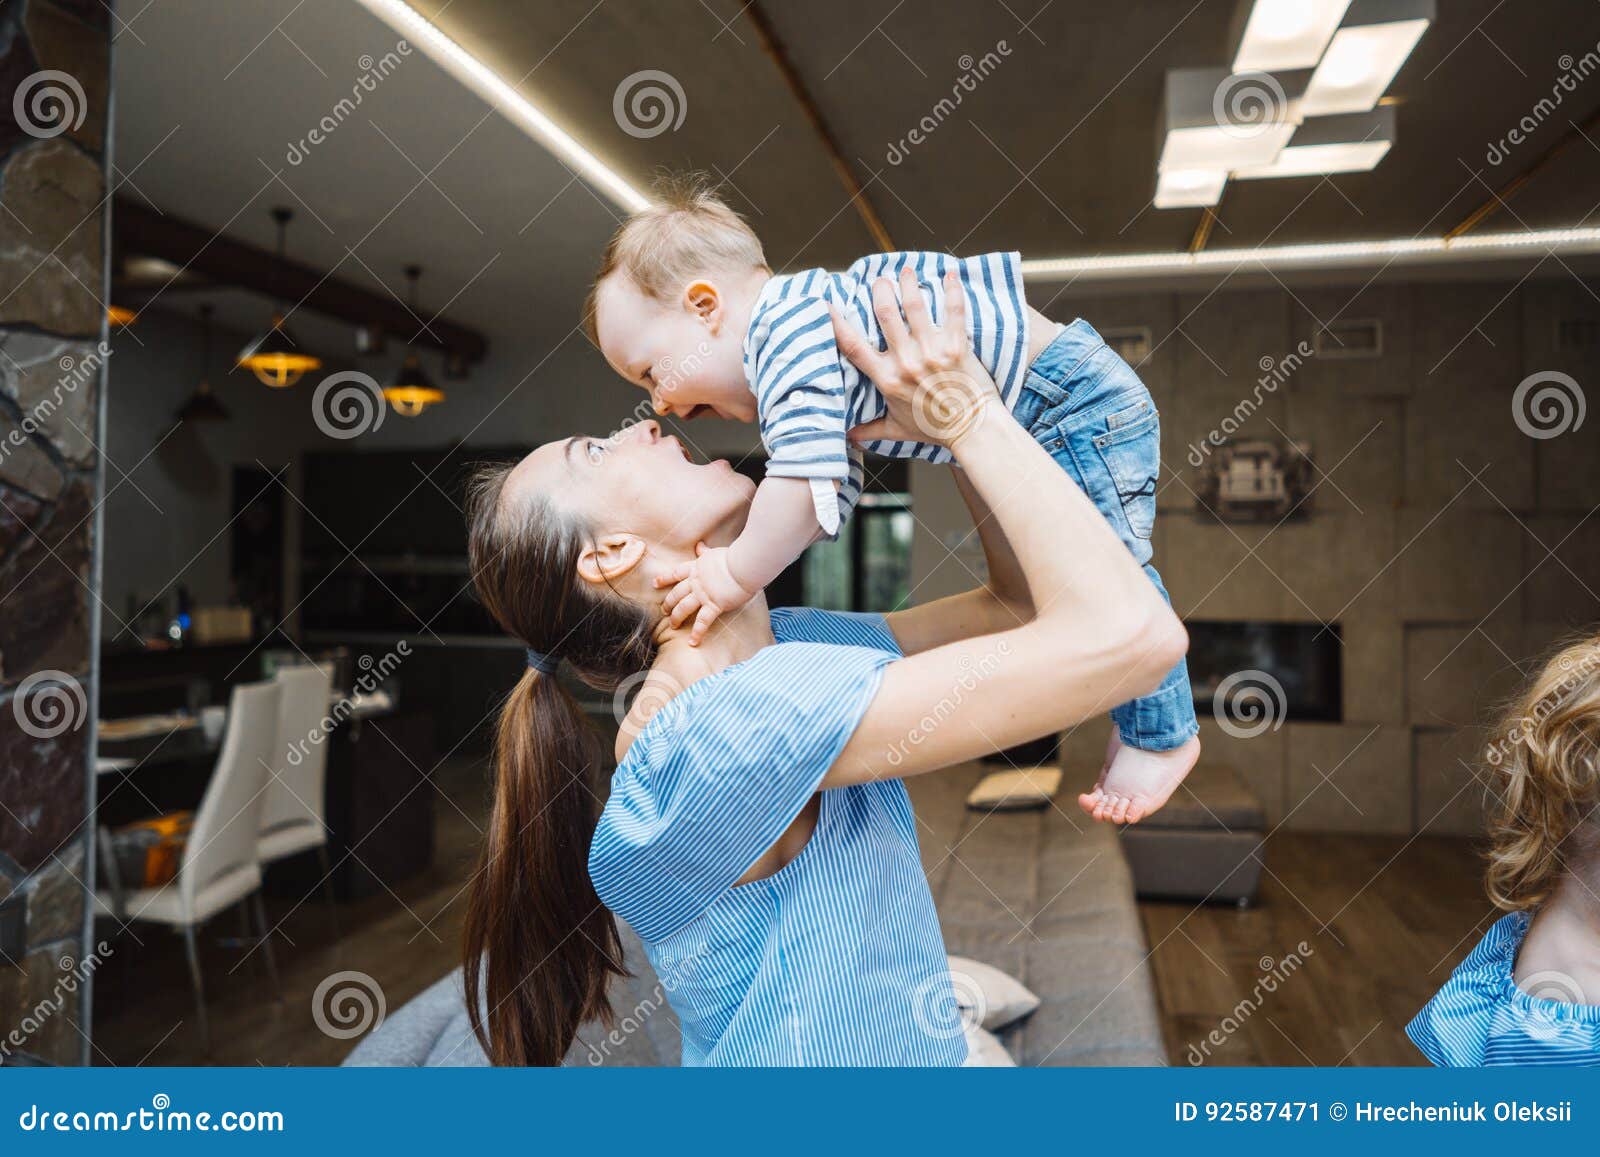 Mom And The Little Son Are Having Fun Stock Image Image Of Childhood